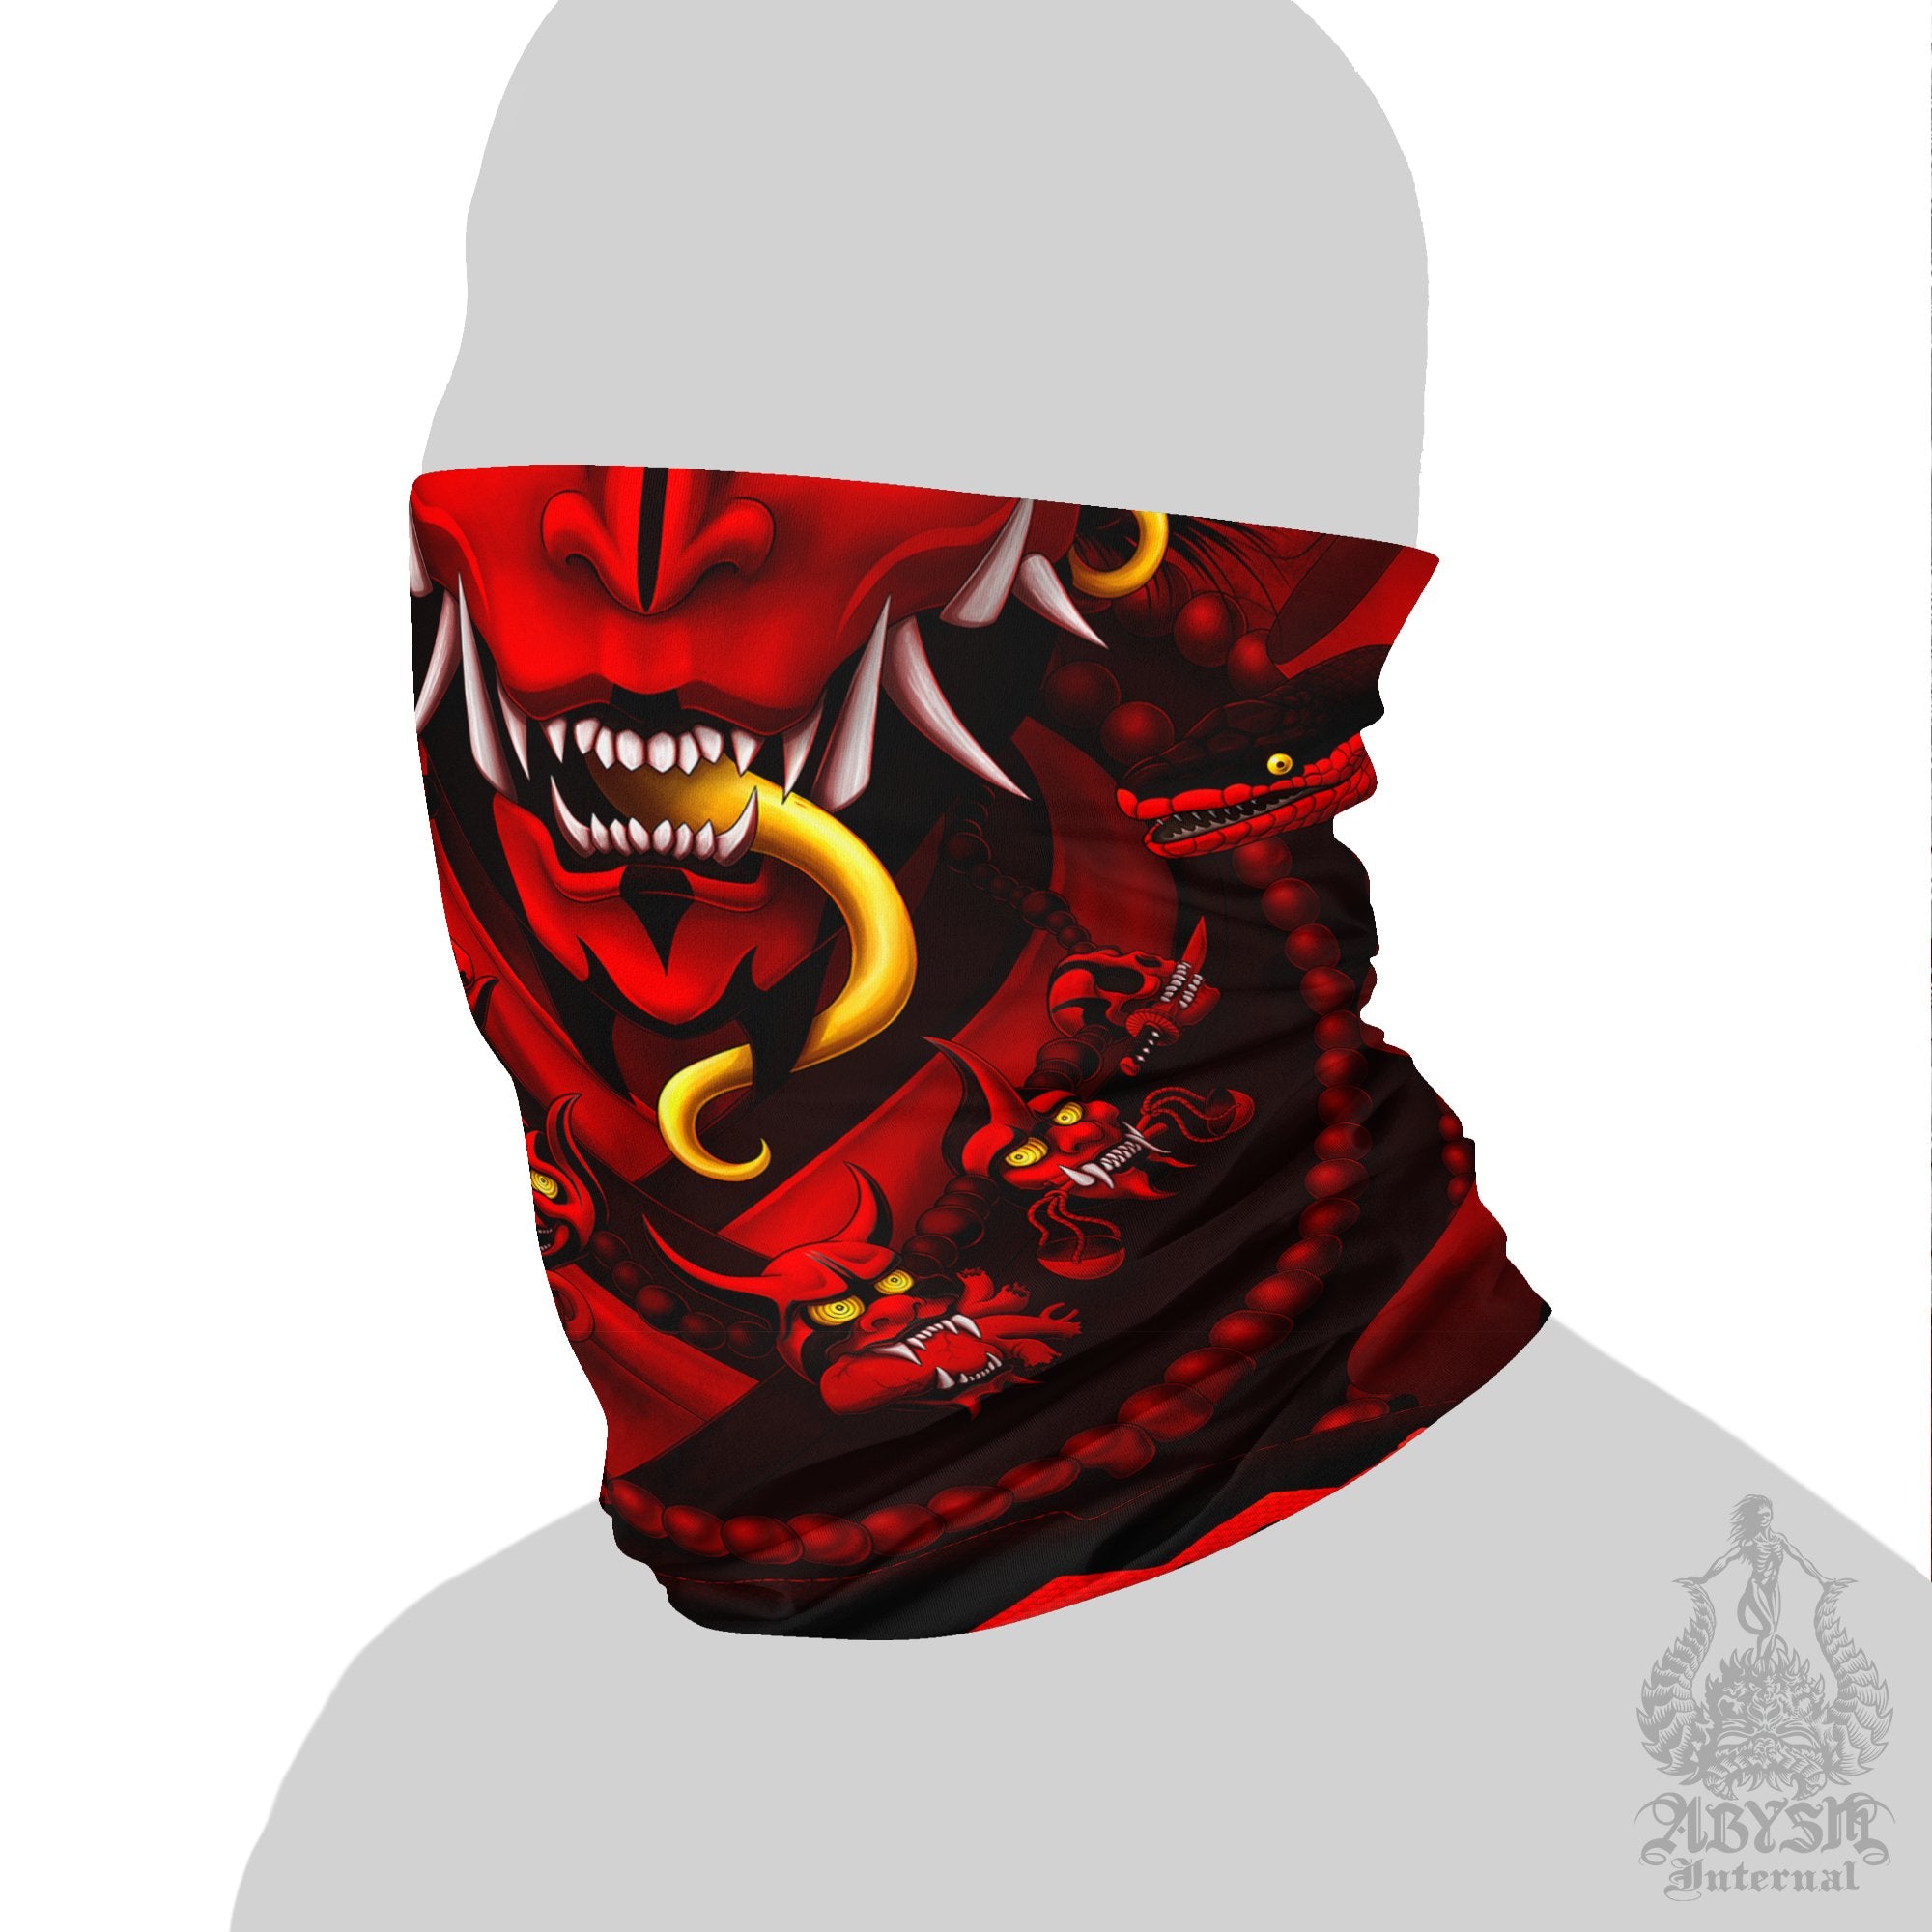 Oni Neck Gaiter, Hannya Face Mask, Japanese Demon Printed Head Covering, Bloody Gothic Street Outfit, Snake, Fangs, Headband - Red, Black - Abysm Internal